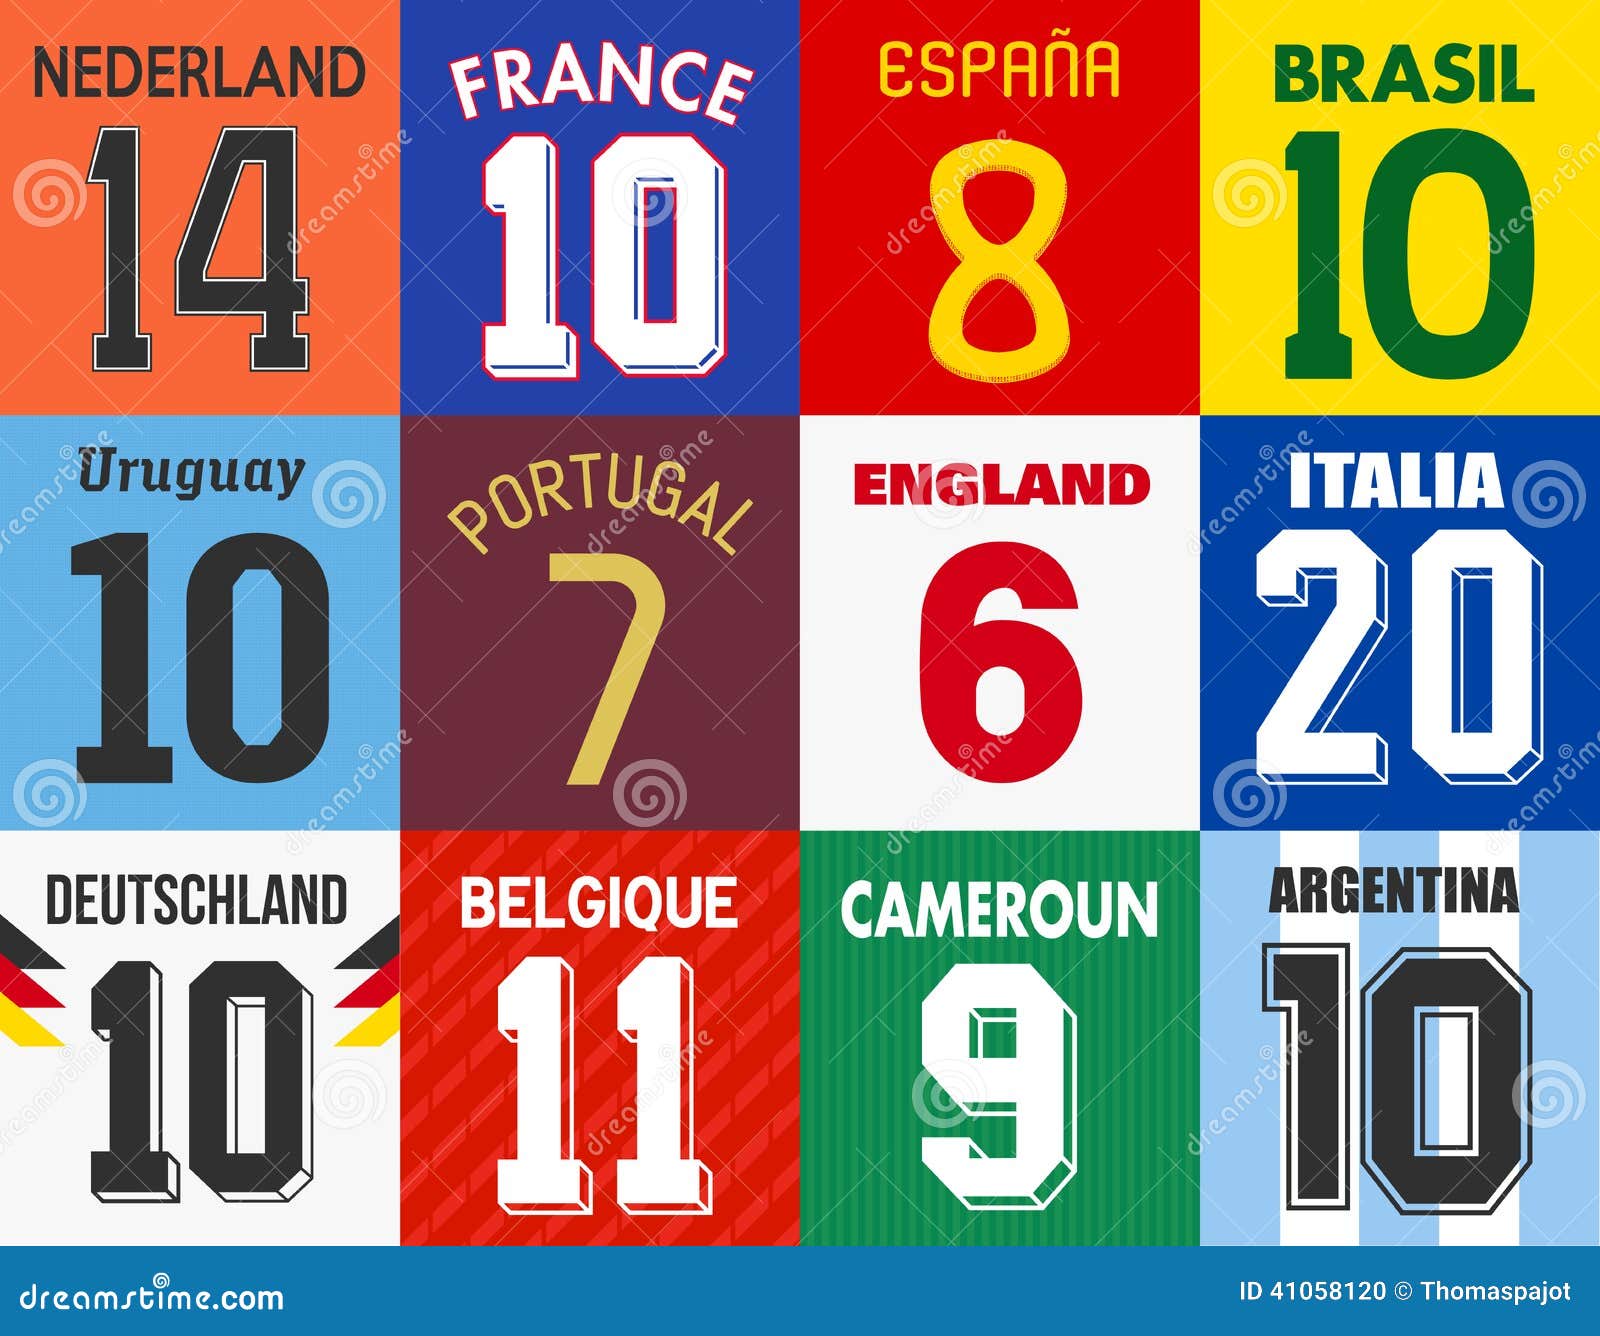 popular soccer jersey numbers